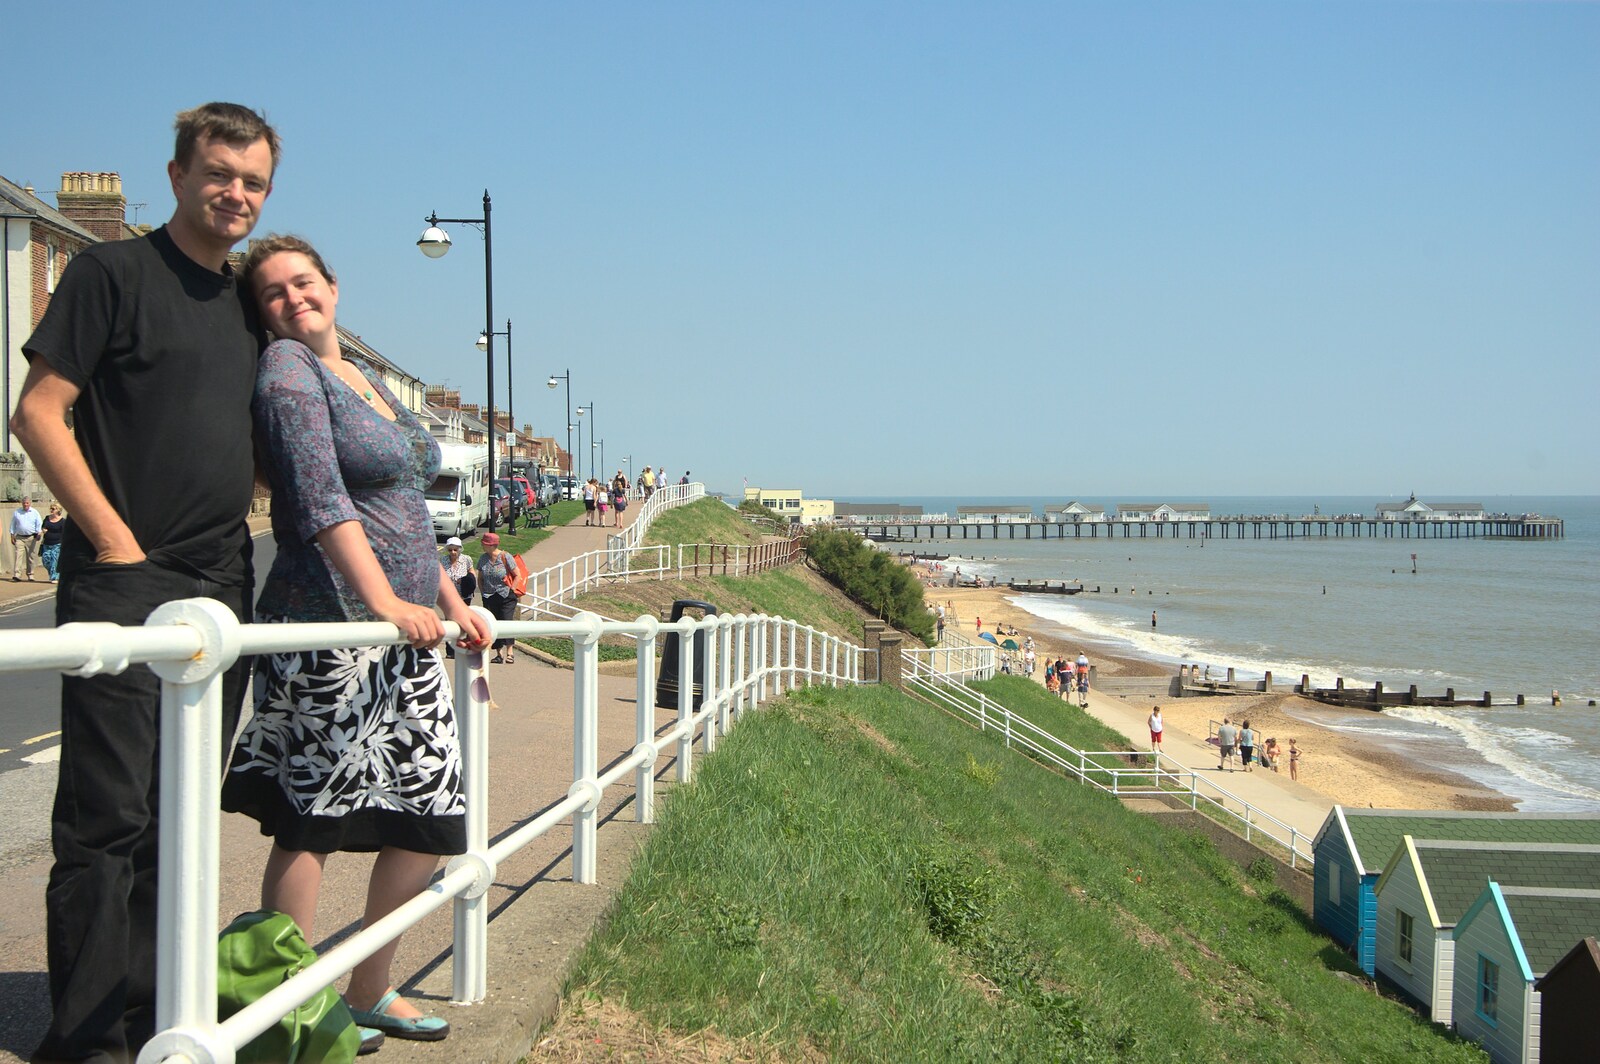 Nosher and Isobel on the promenade from The First Anniversary, Southwold, Suffolk - 3rd July 2011